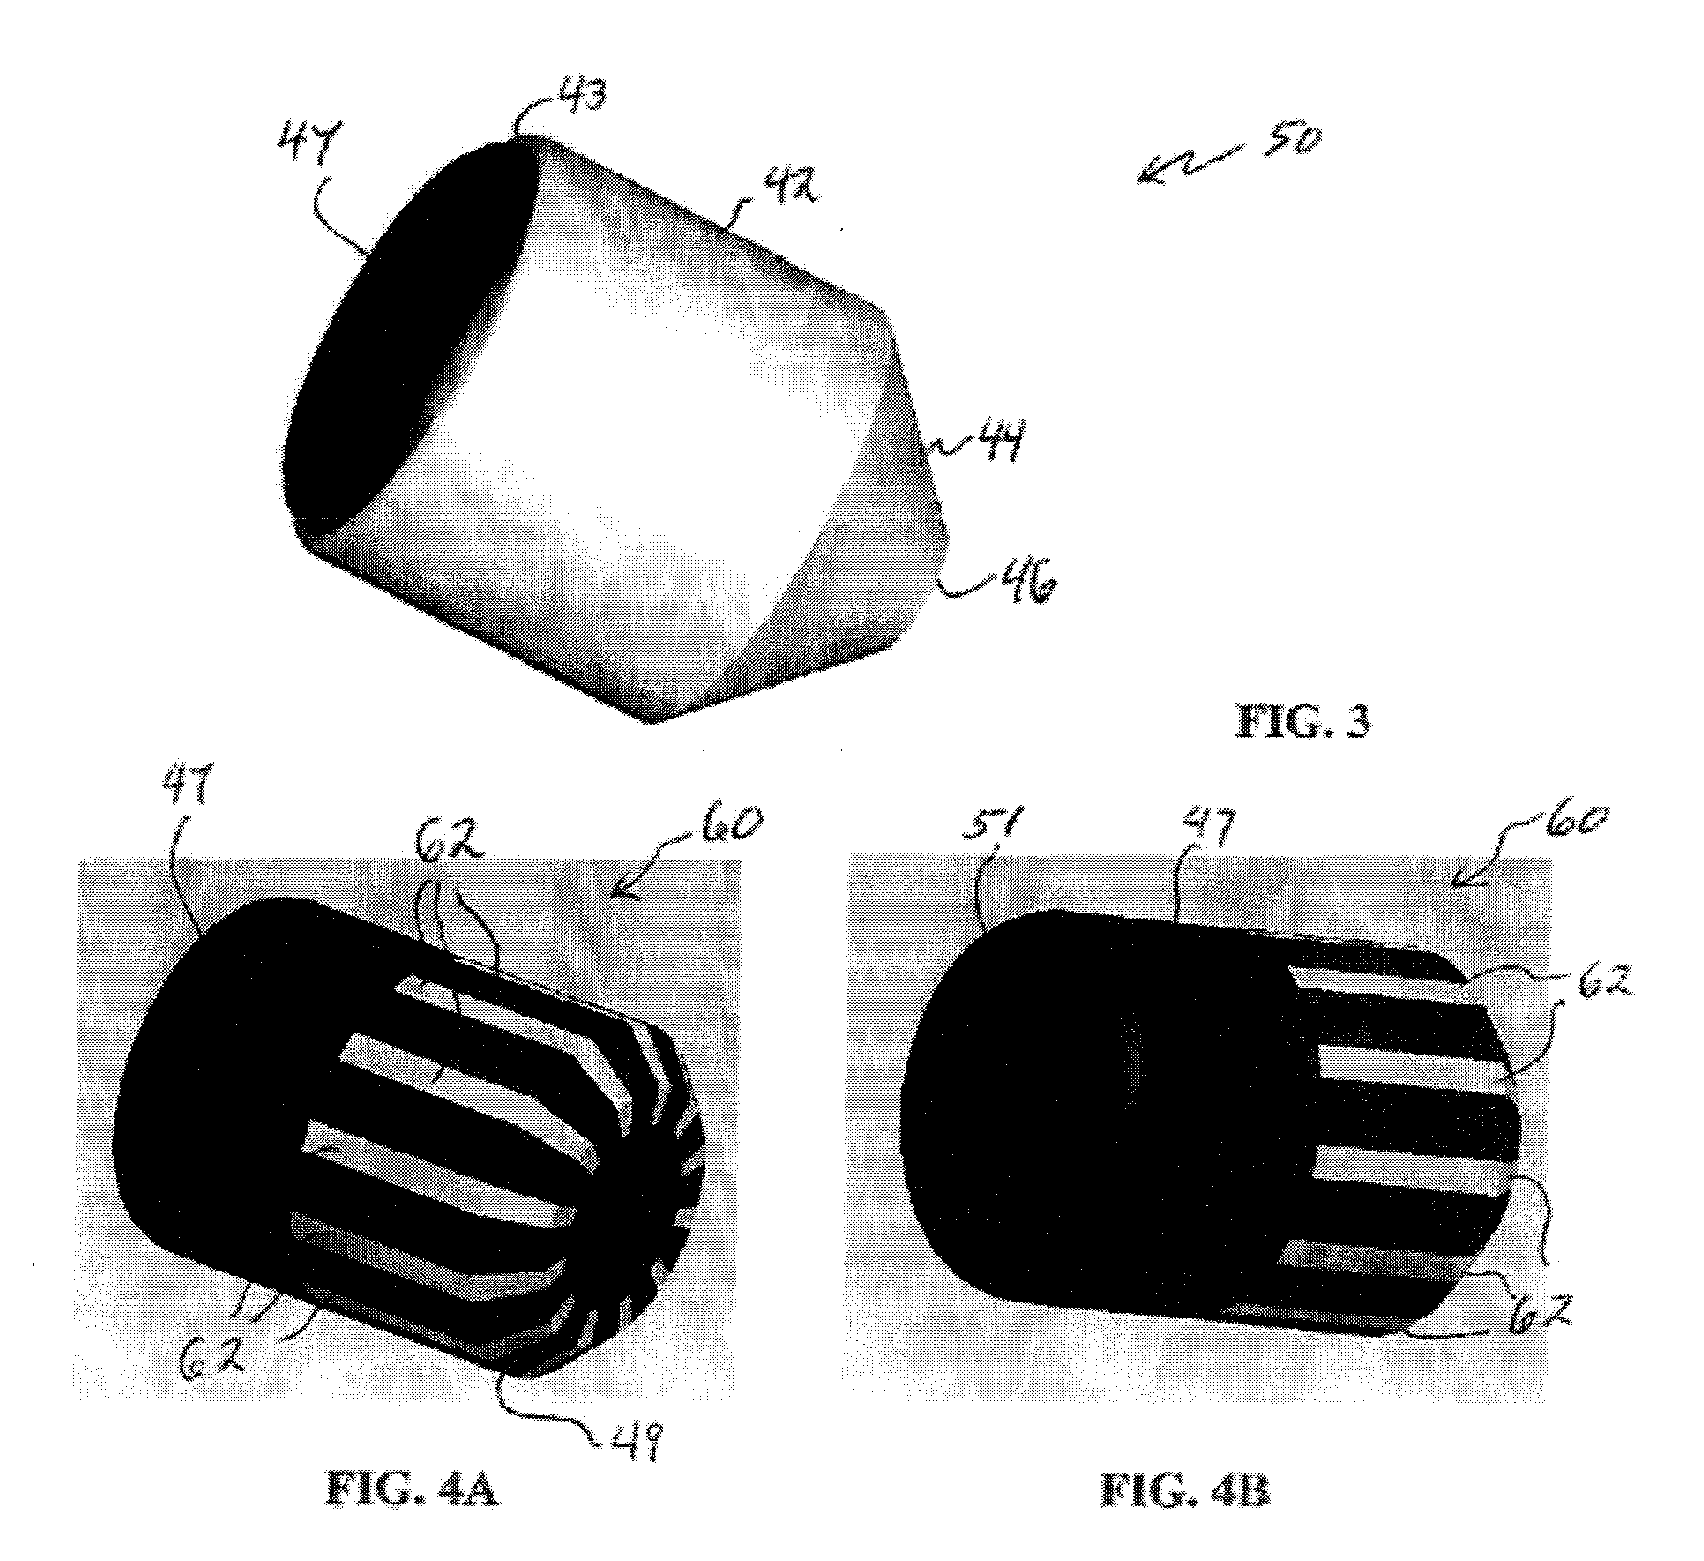 Well Operating Elements Comprising a Soluble Component and Methods of Use